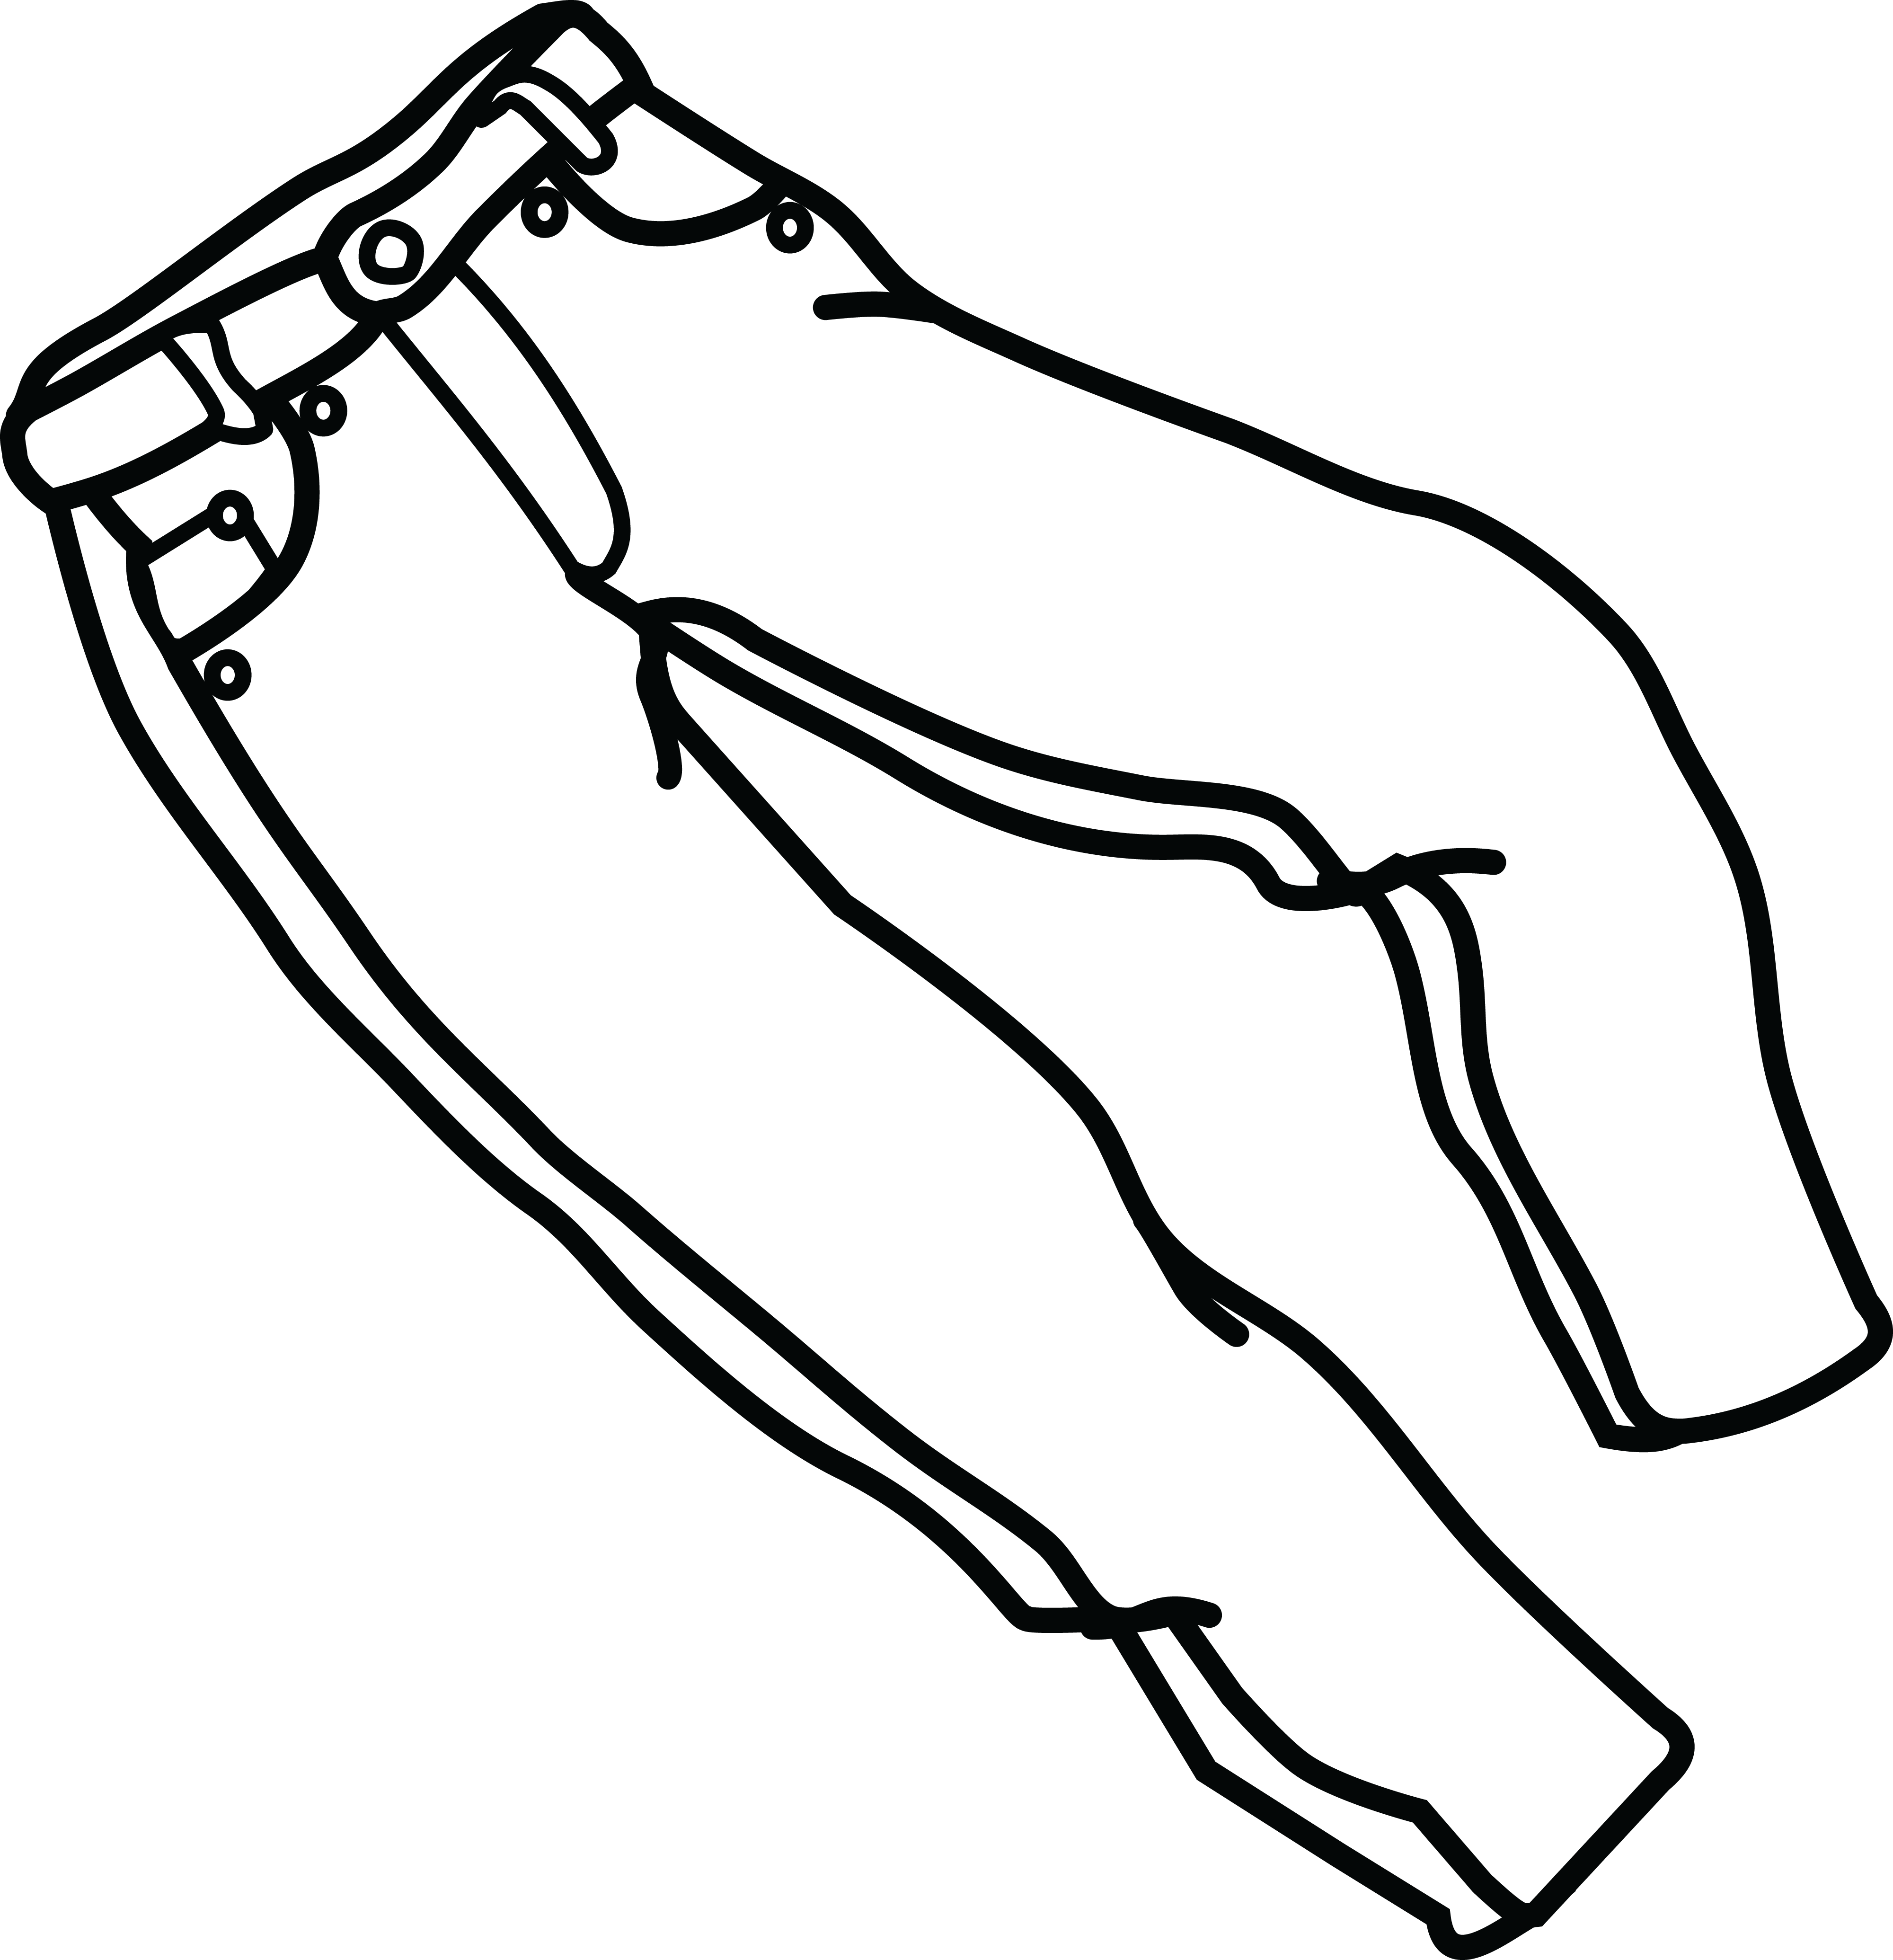 Pants clipart black and white, Pants black and white